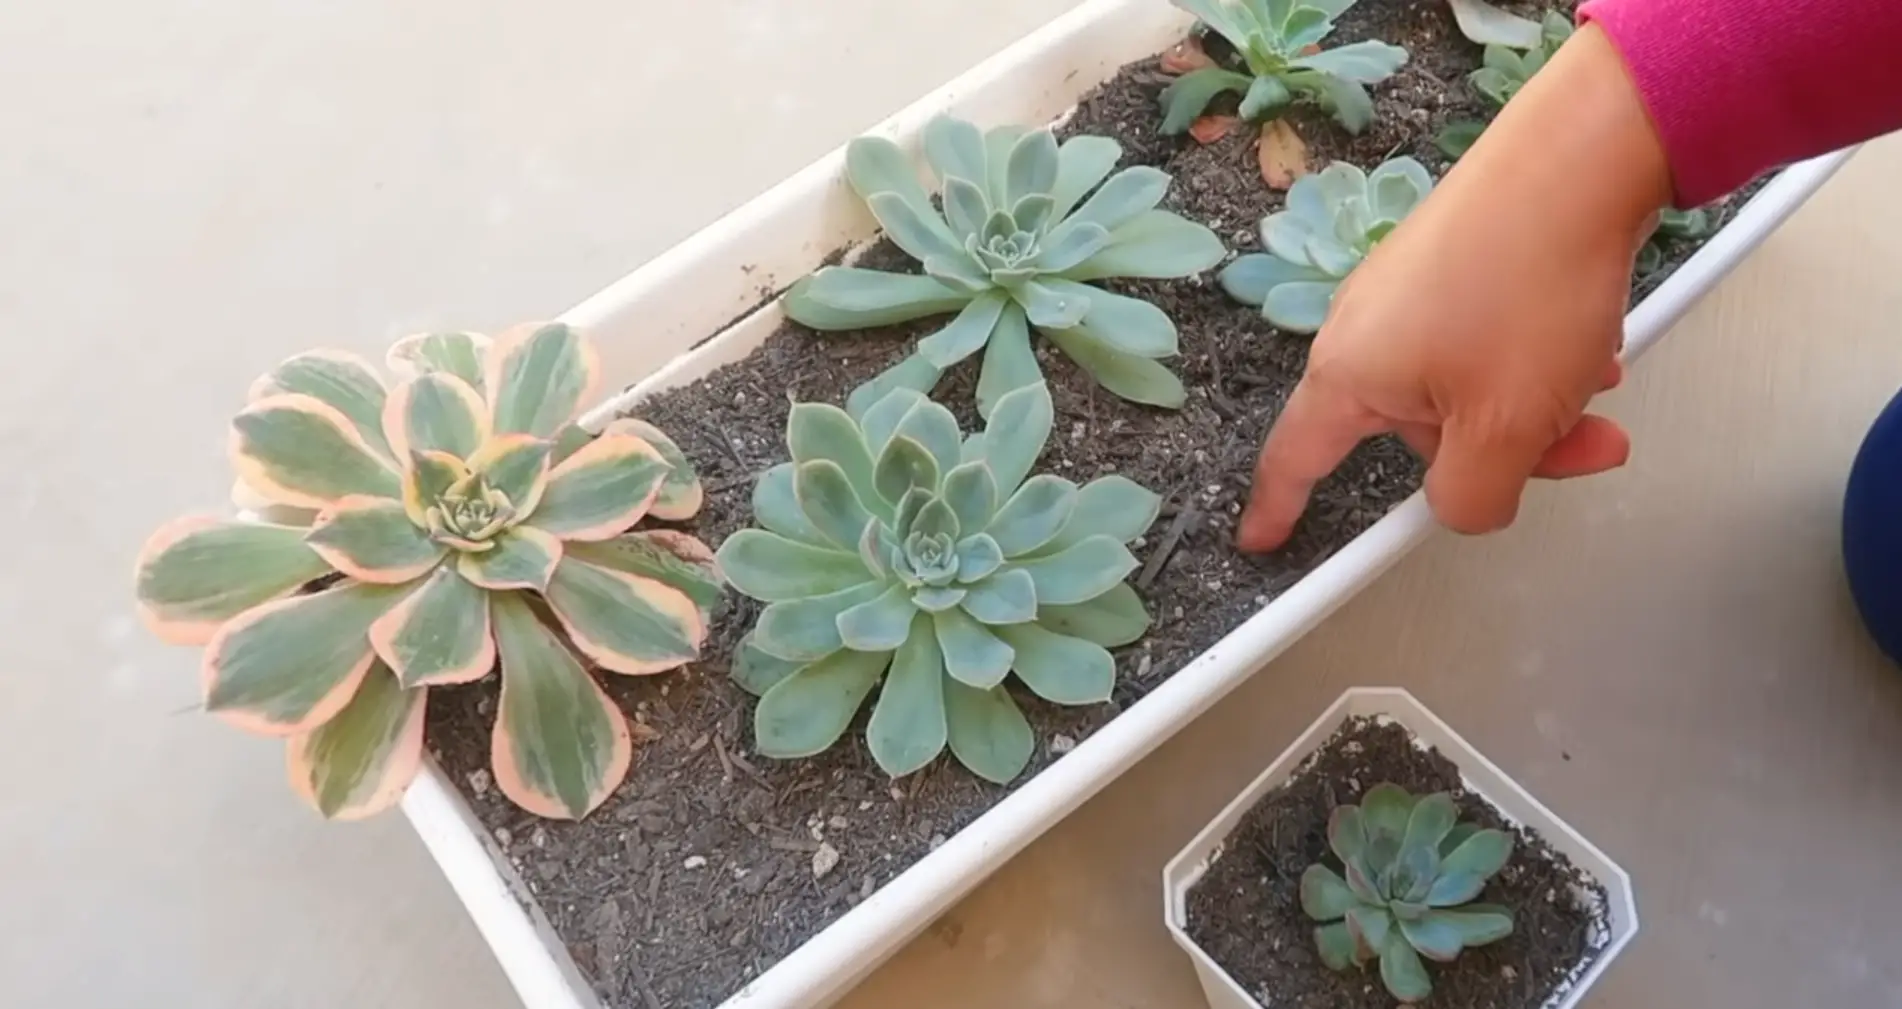 How to Water Succulents?